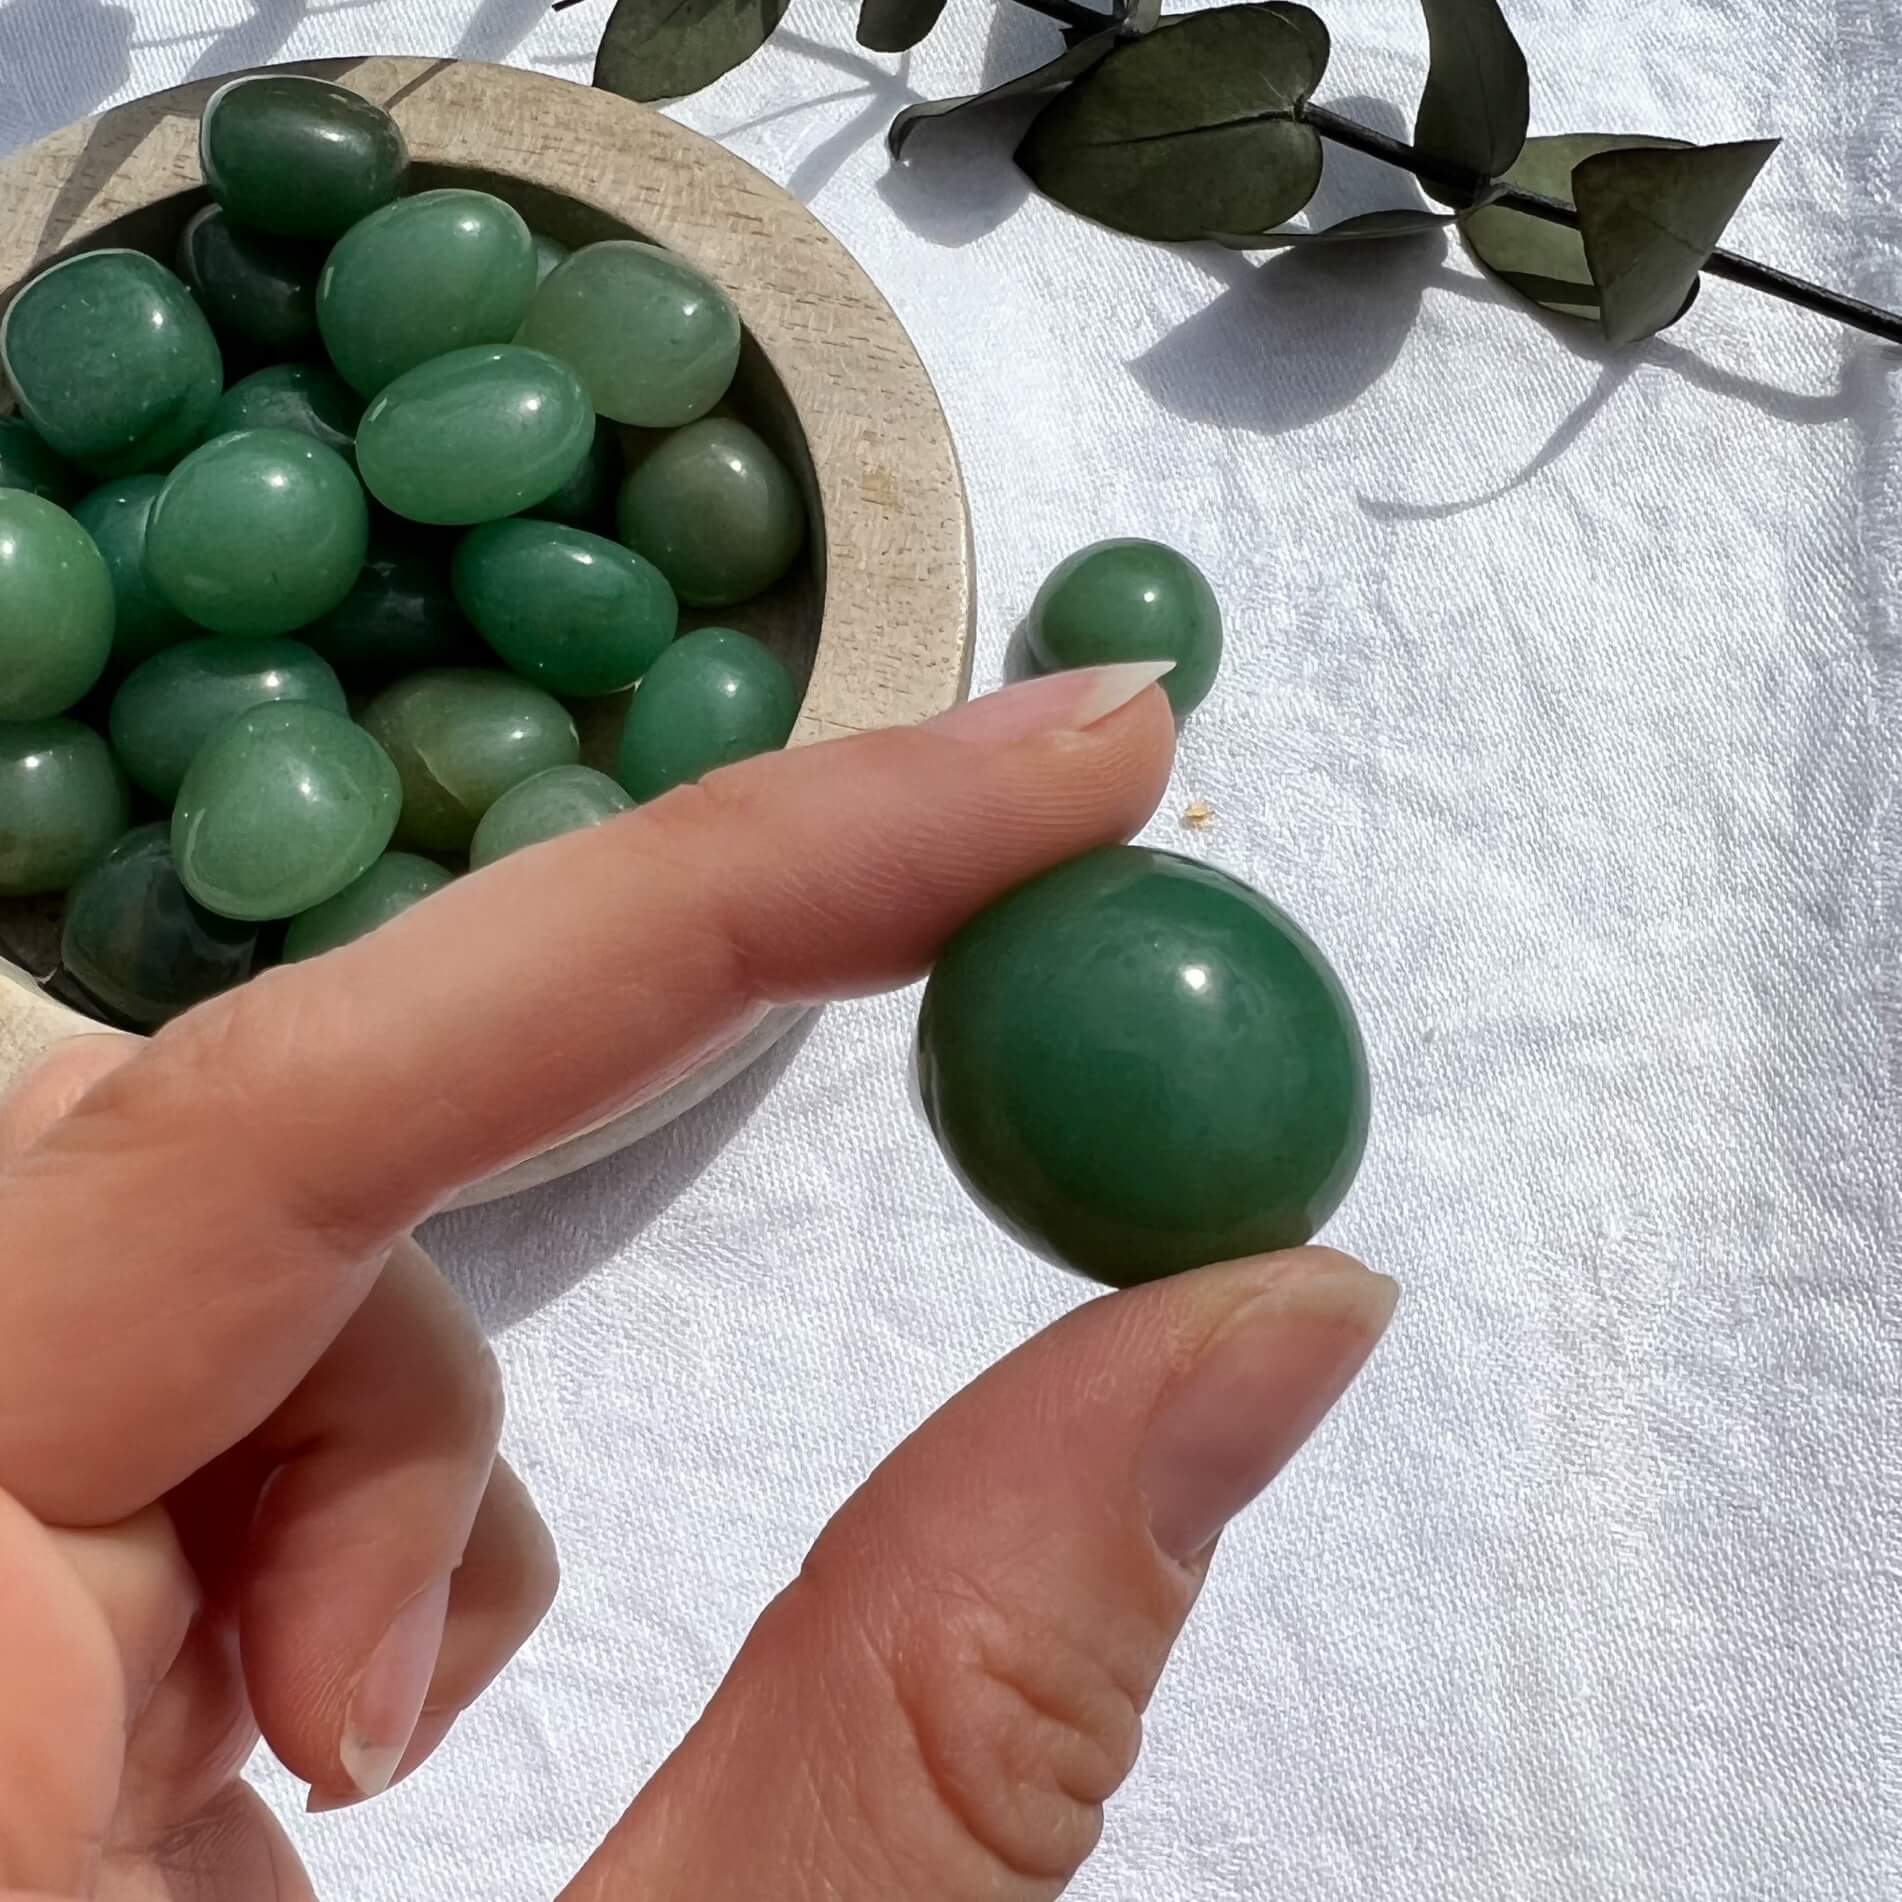 A perfect green glossy Green Aventurine crystal tumble stone held to camera